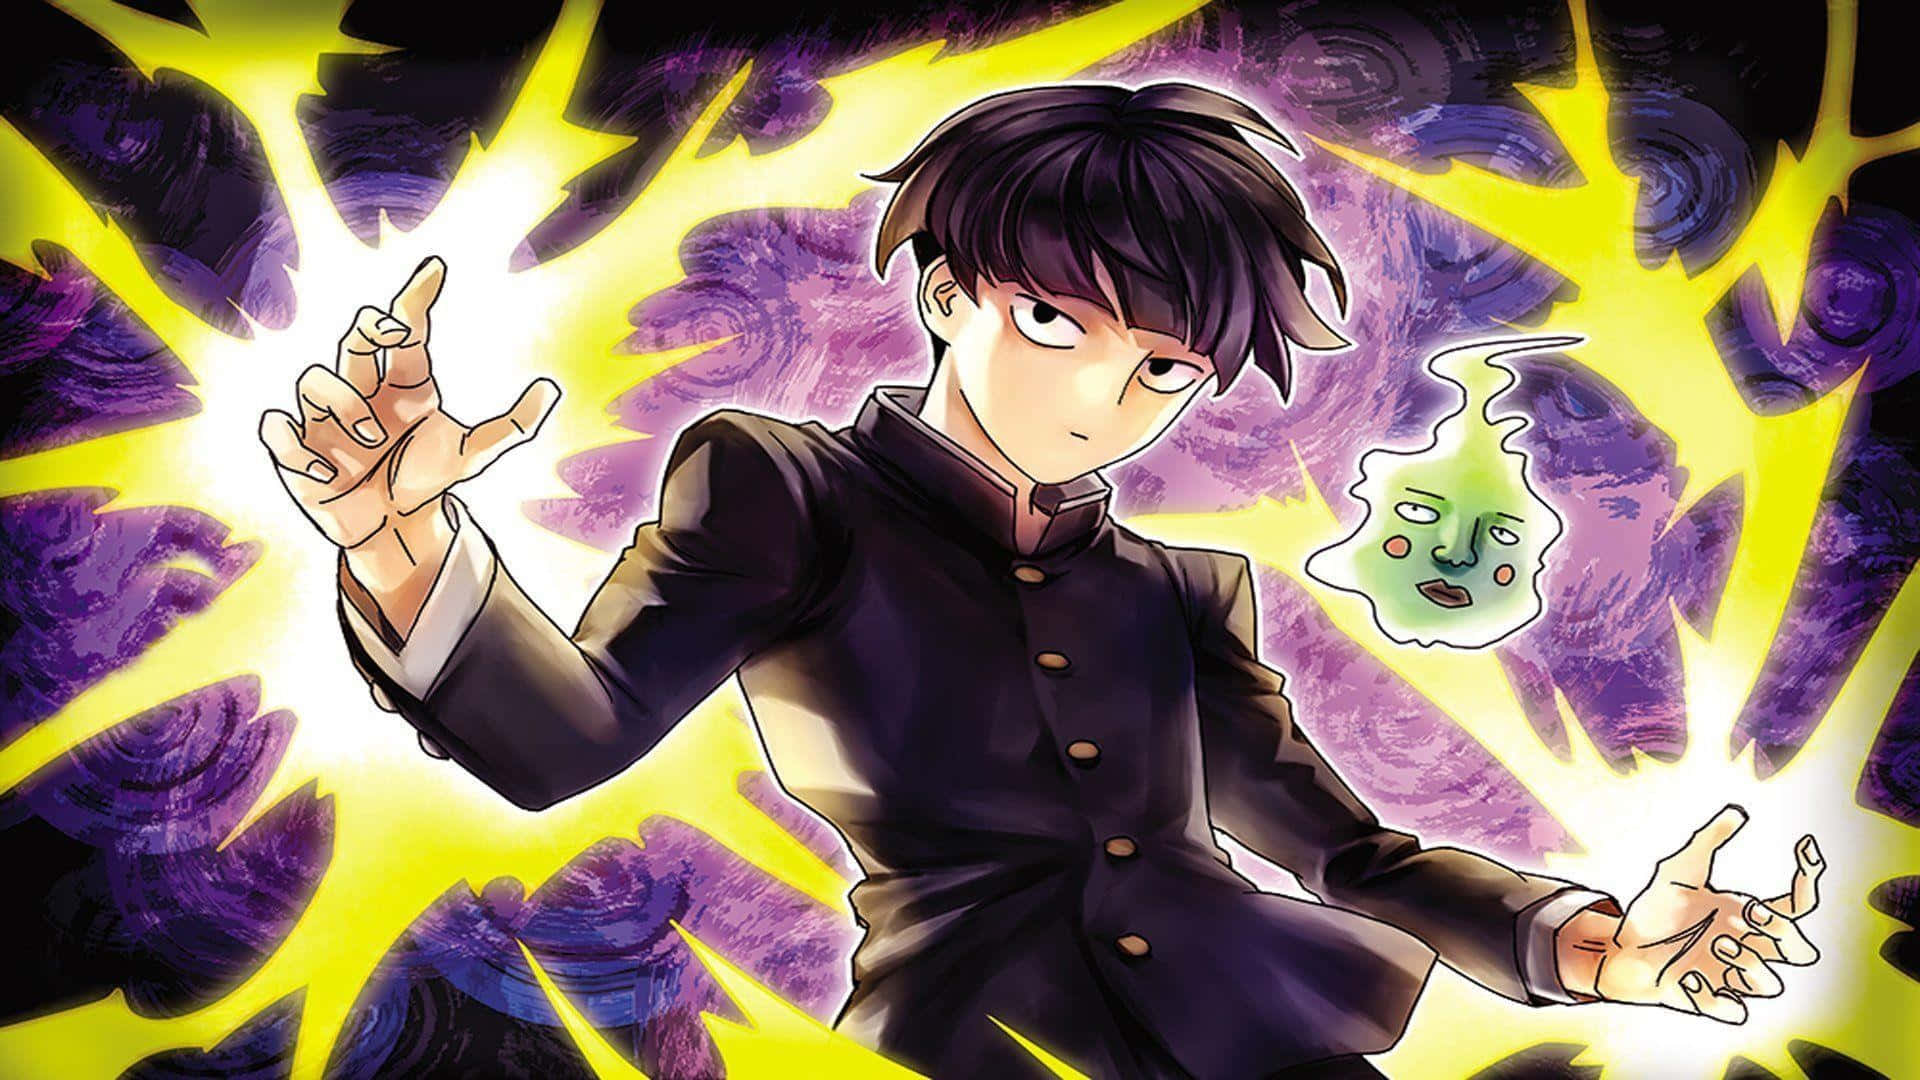 “Discover the world of Mob Psycho 100!”